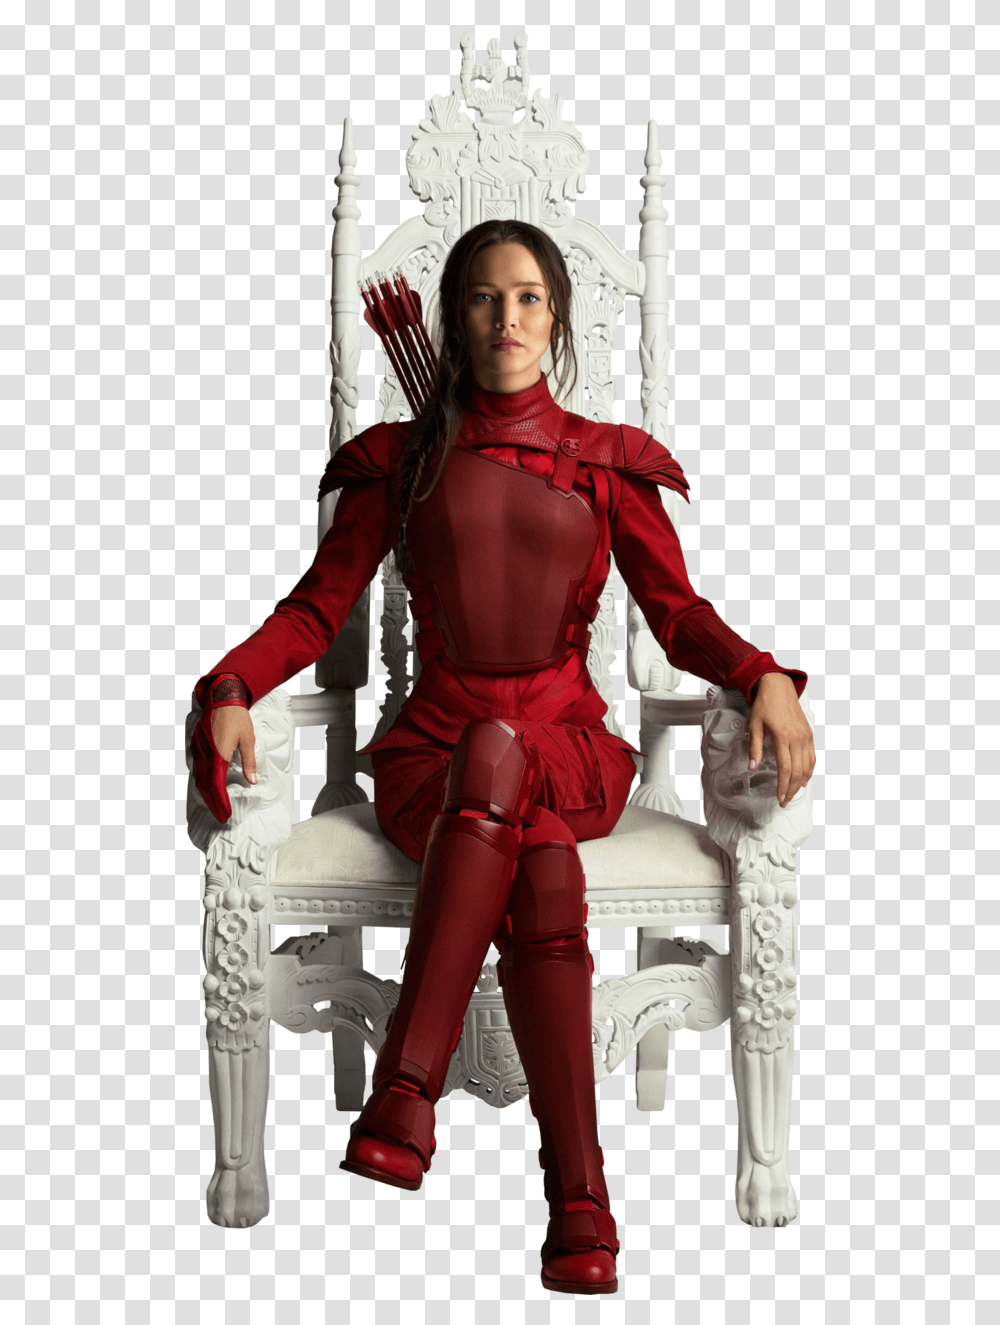 Download The Hunger Games Free Last Hunger Games Movie, Clothing, Apparel, Costume, Footwear Transparent Png